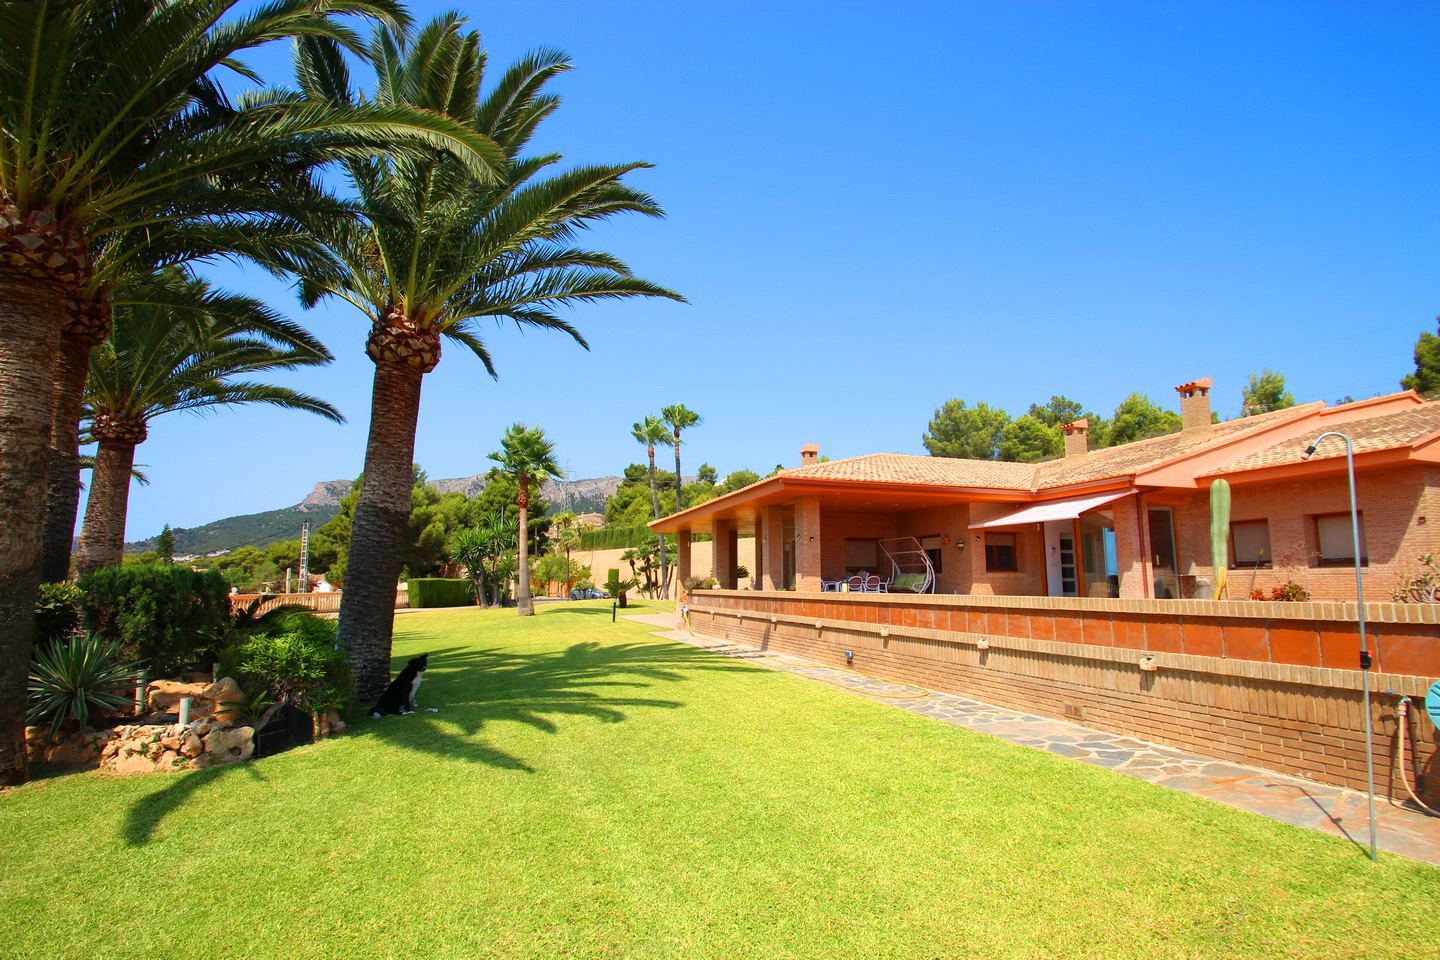 Luxury villa located in Calpe with 5 bedrooms and plot of 12.000 m2  with garden and indoor pool.